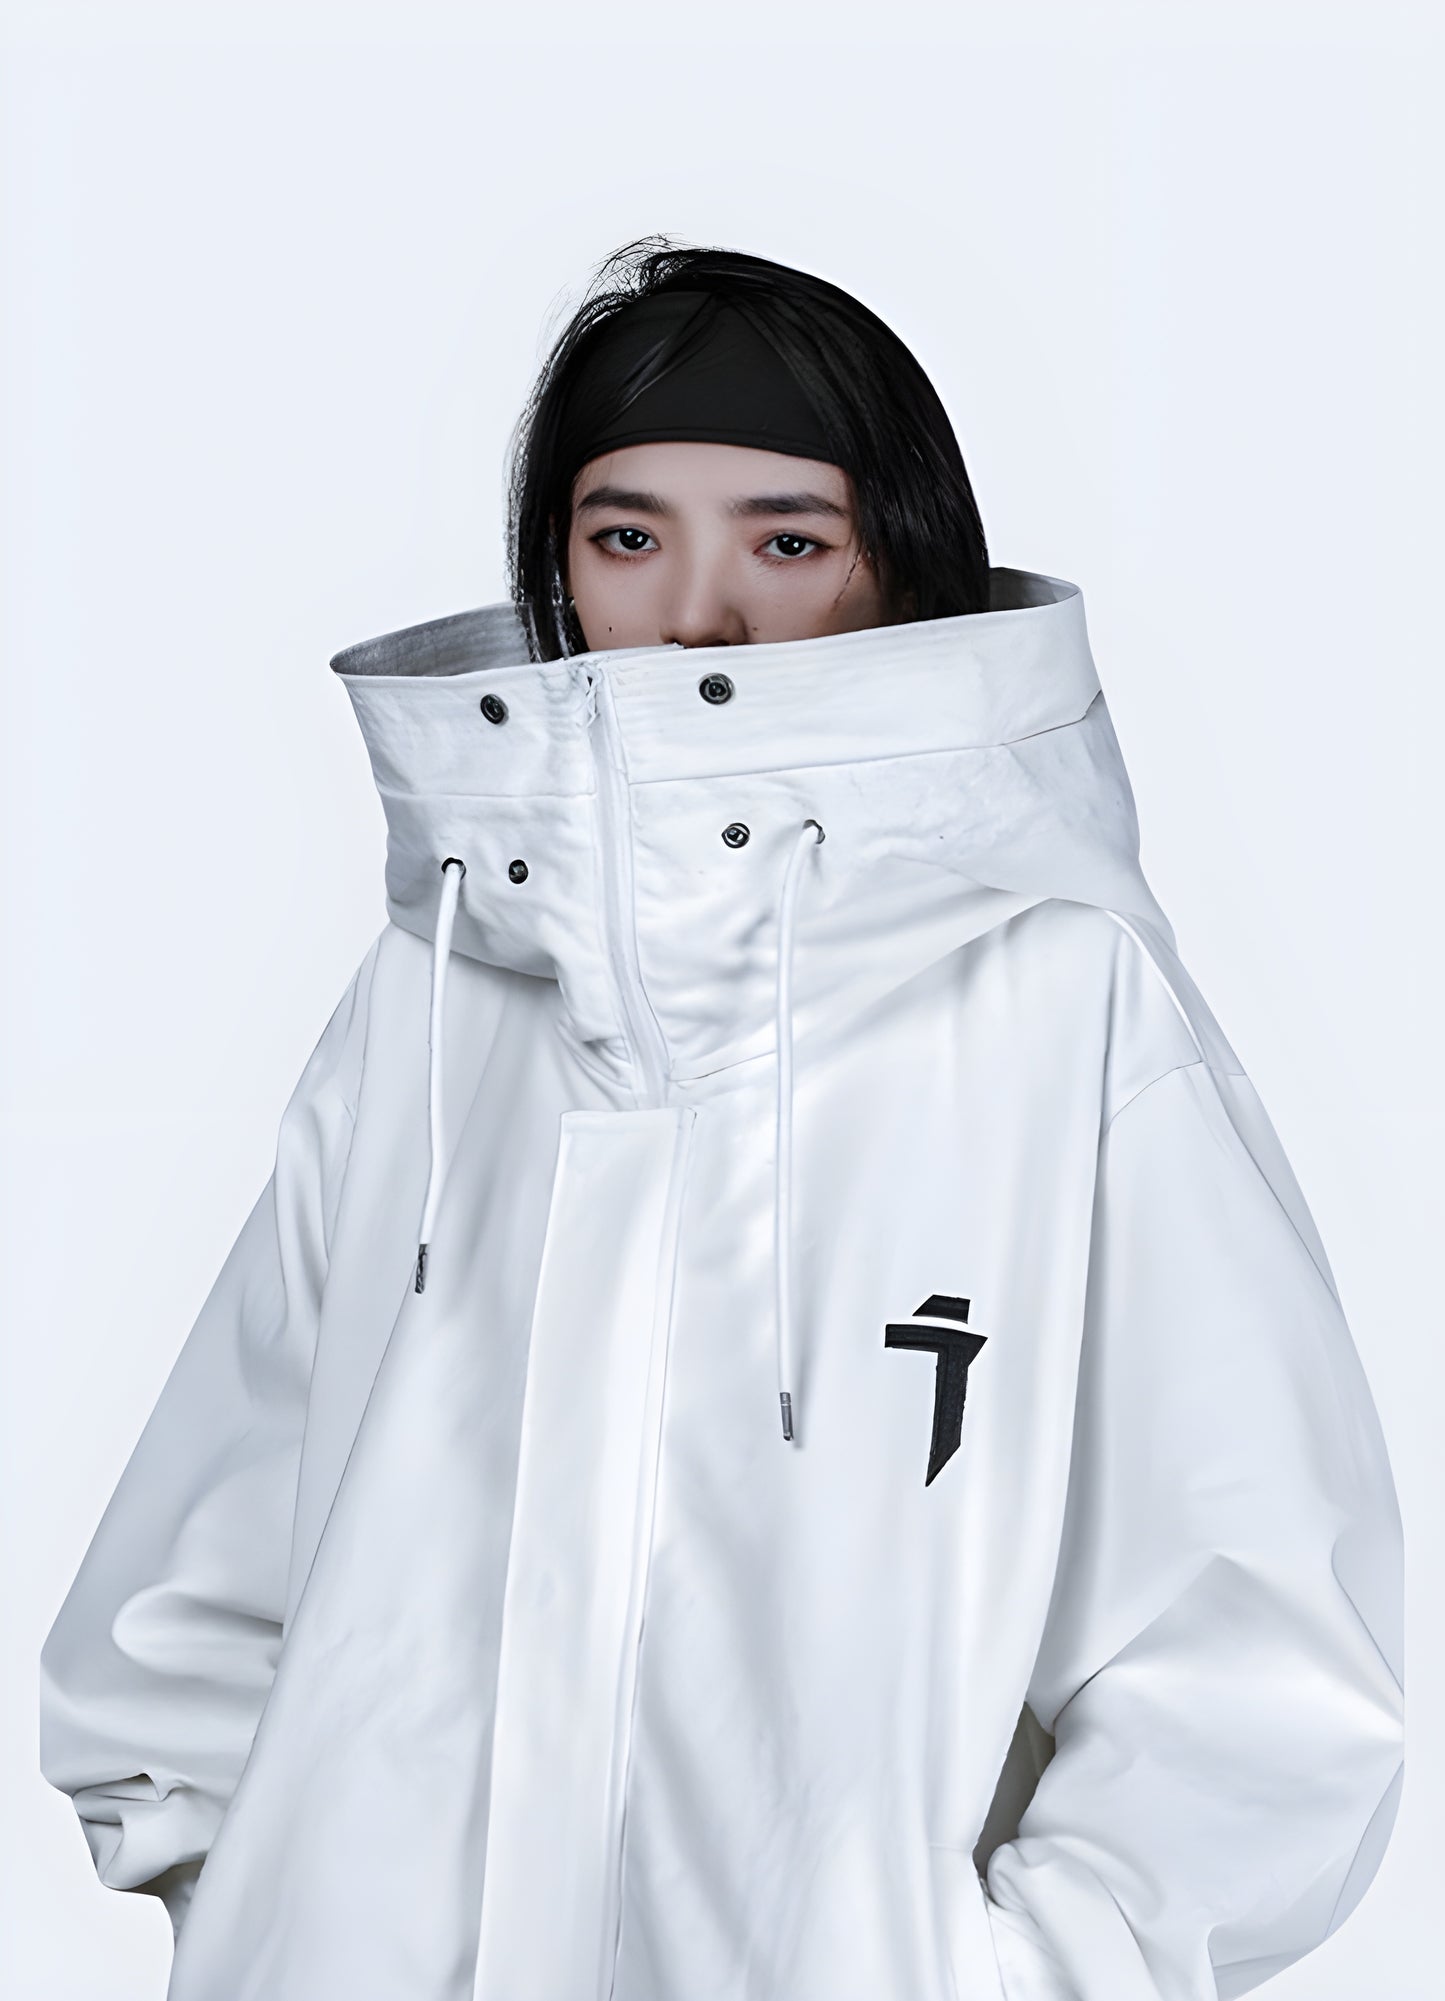 With its unique high collar and reinforced oversized hood.